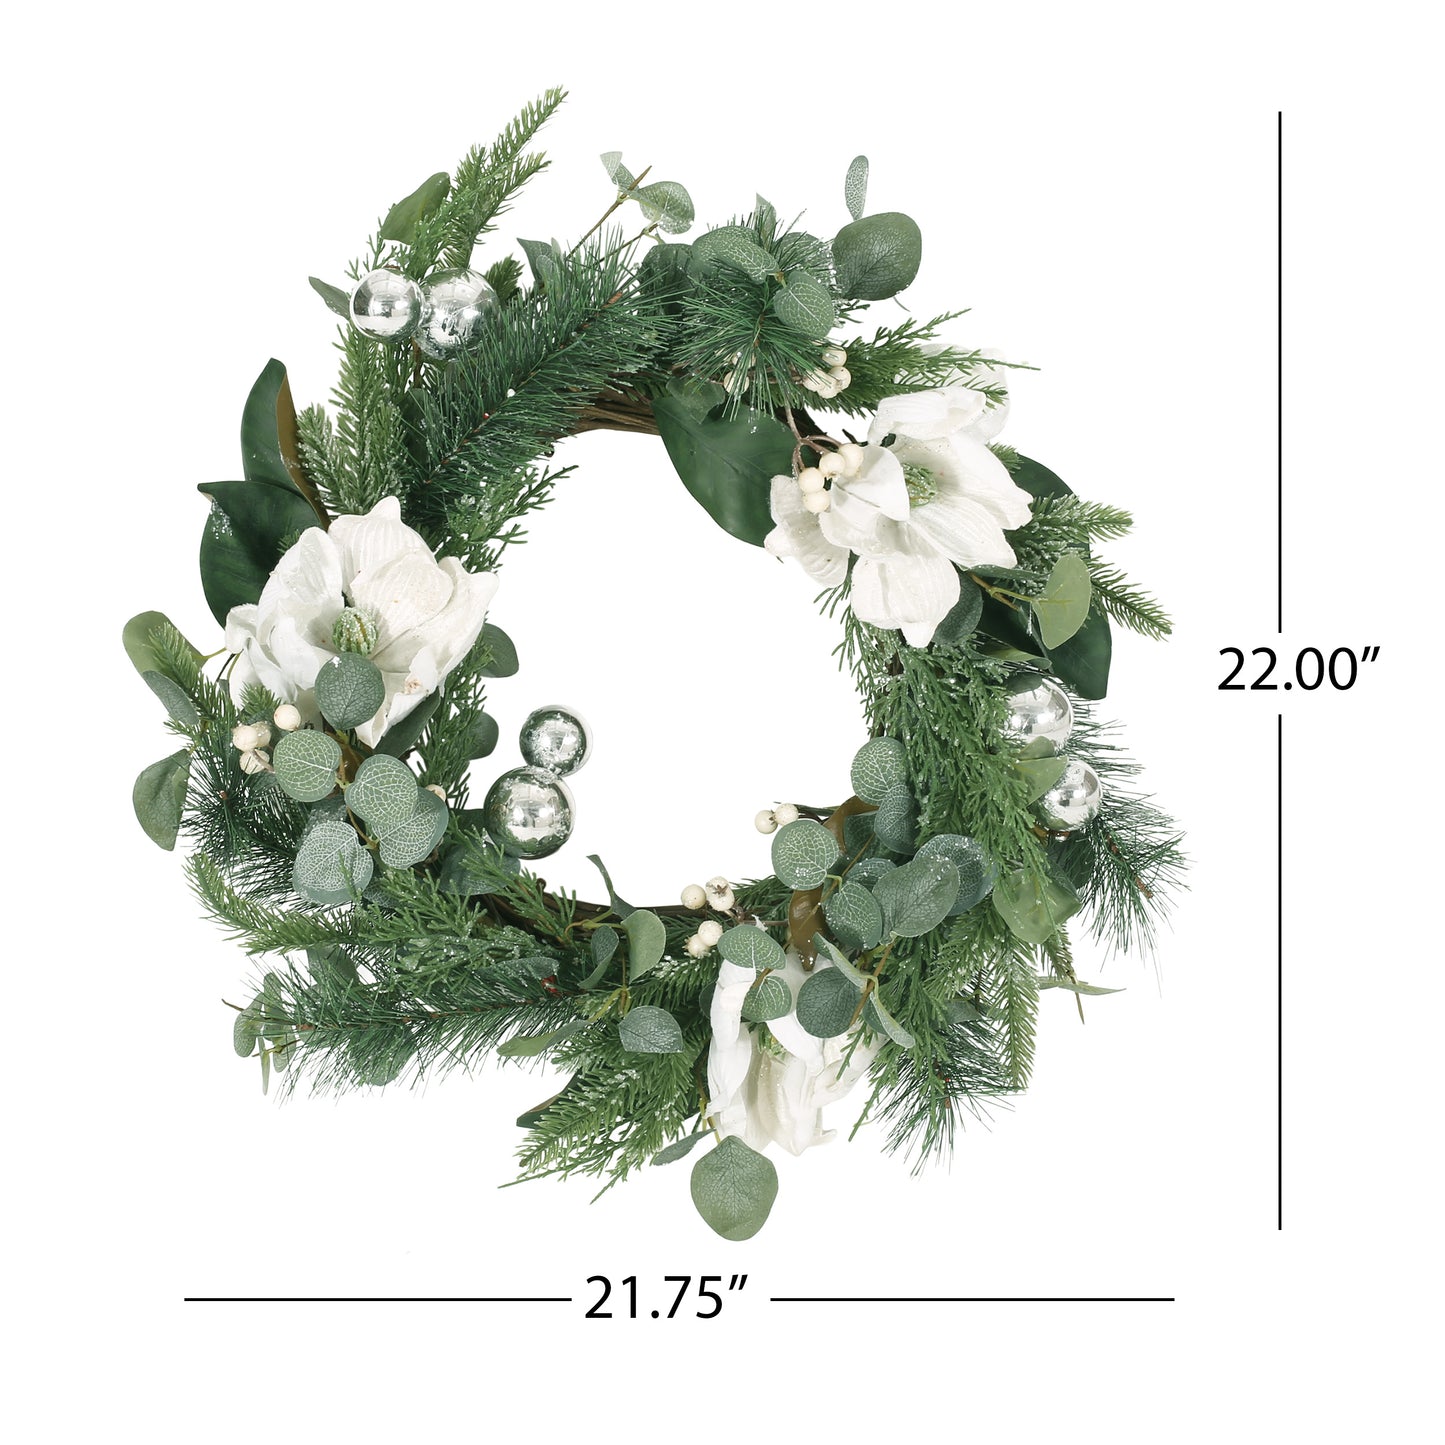 McKone 21.75" Eucalyptus and Pine Artificial Wreath with Magnolias, Green and White